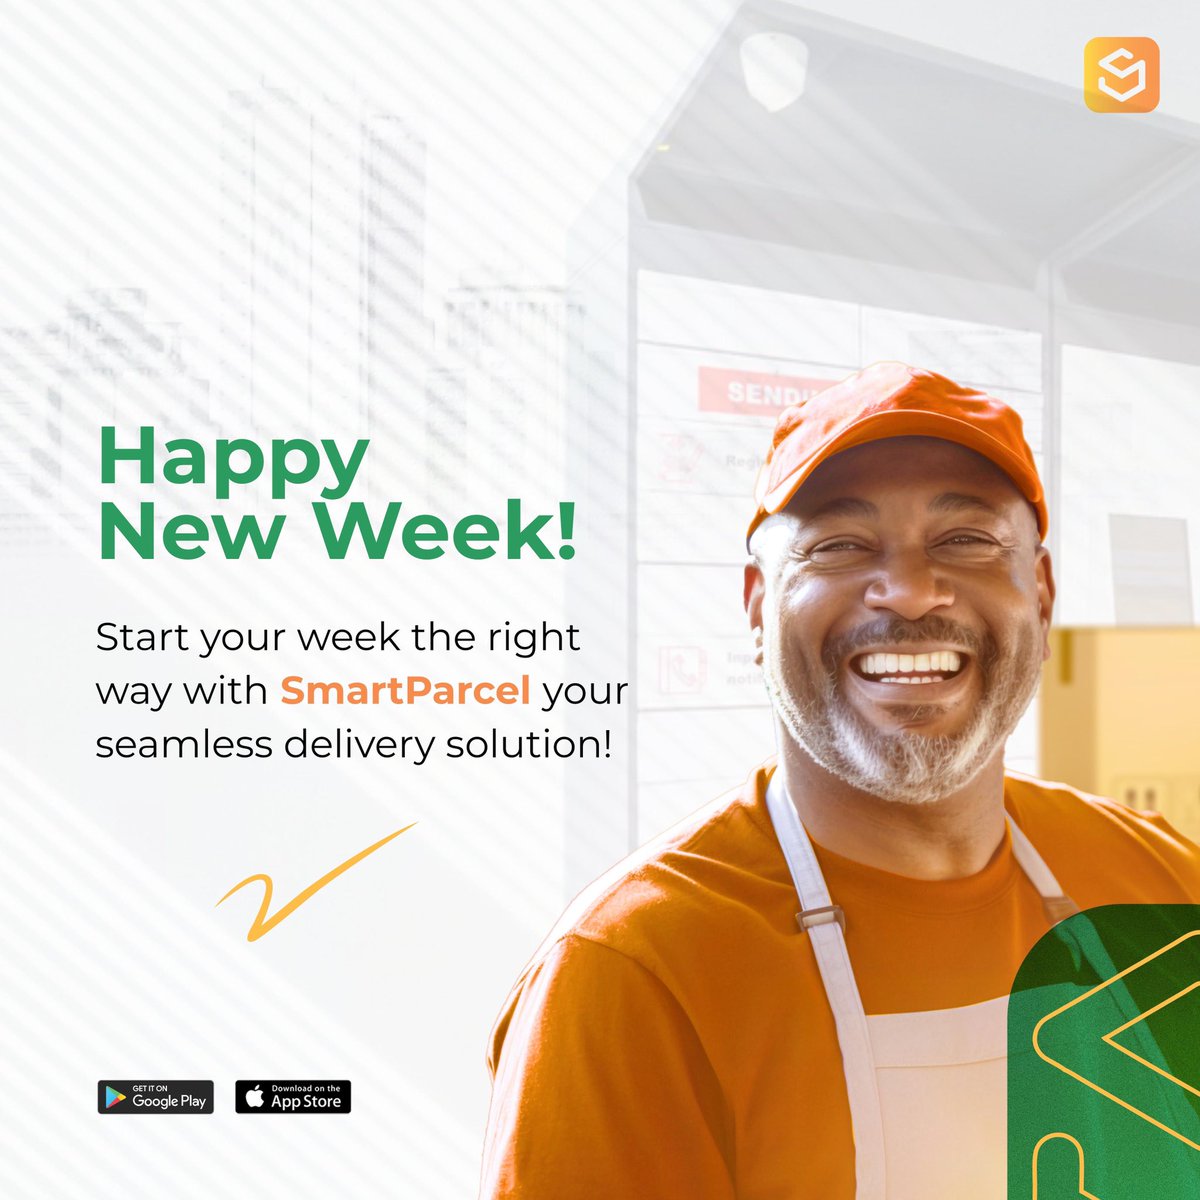 Start your week properly with SmartParcel, your ultimate delivery solution! 

Say hello to hassle-free deliveries and a productive week ahead. 

#SmartParcel #DeliverySolutions #SmartLocker #NewWeek